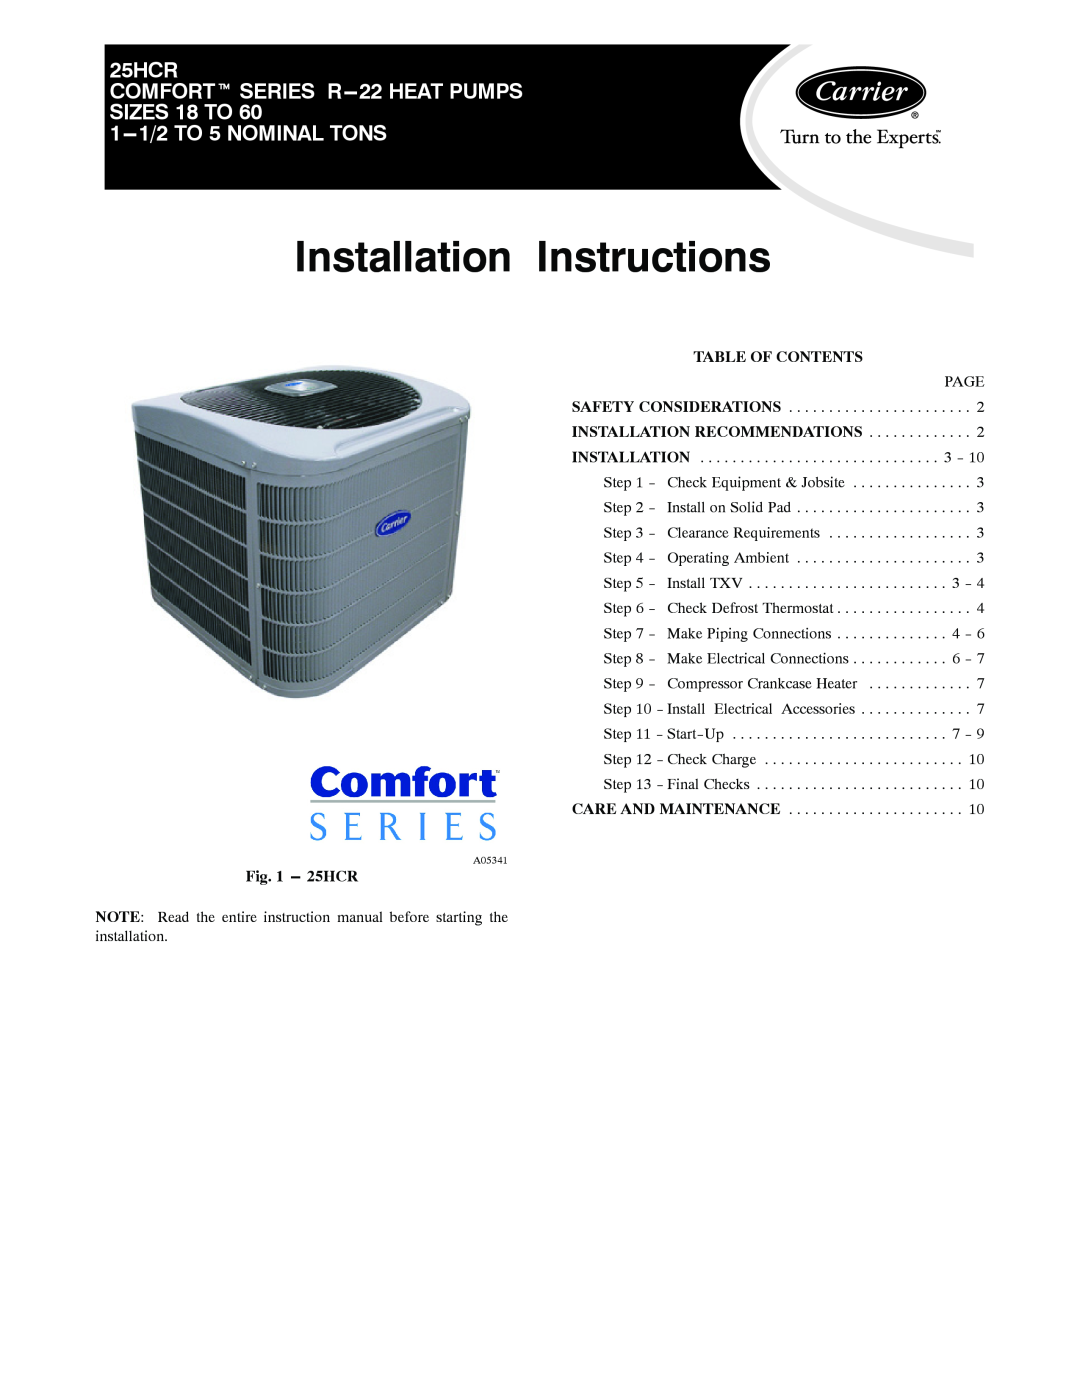 Carrier 25HCR installation instructions Table Of Contents, Installation Recommendations, Installation Instructions 